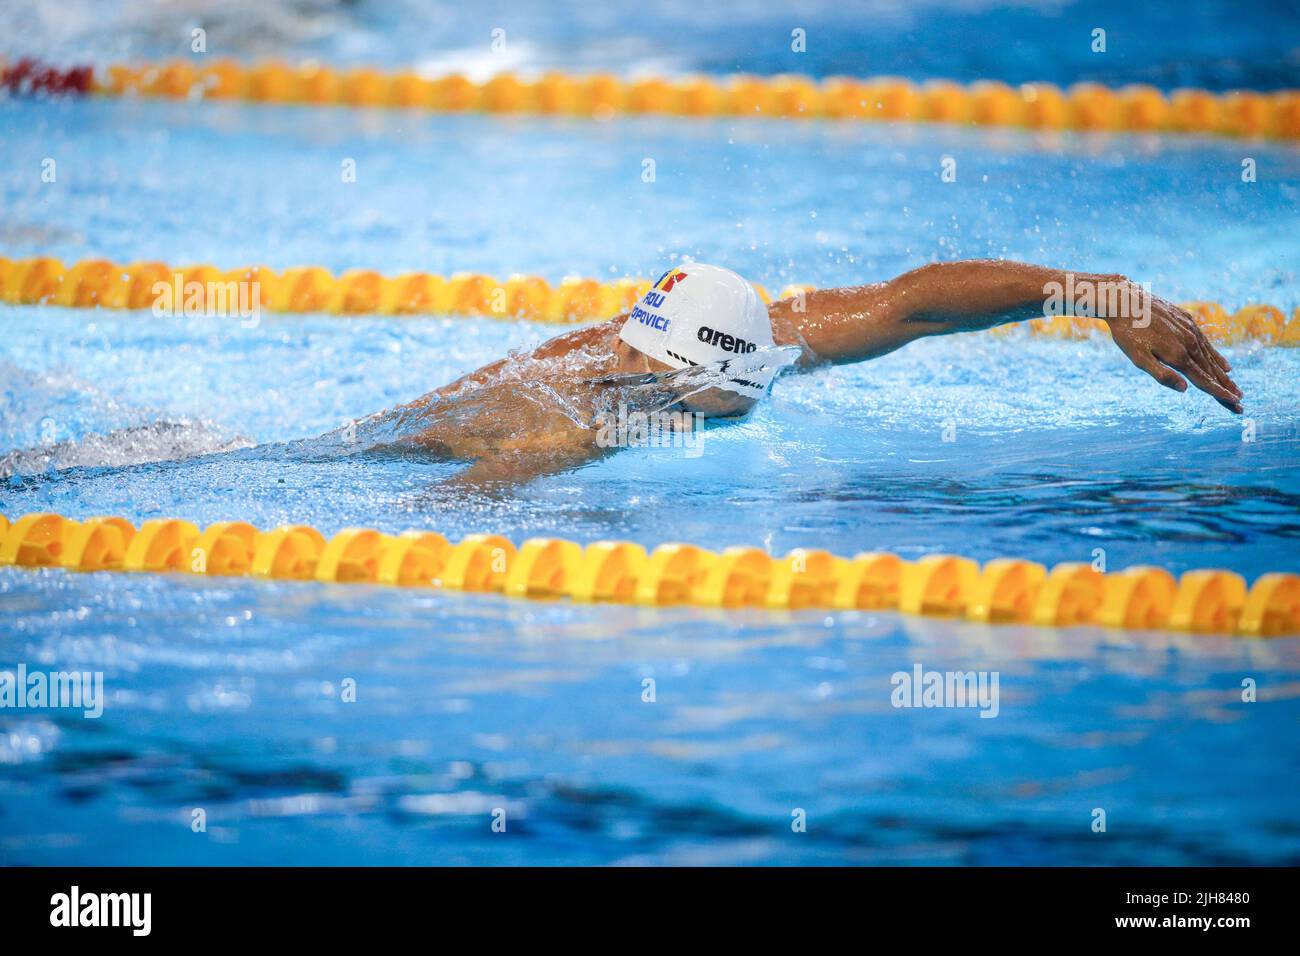 Otopeni, Romania - 8 July 2022: Details with David Popovici swimmer from Romania competing at the LEN European Junior Championships. Stock Photo